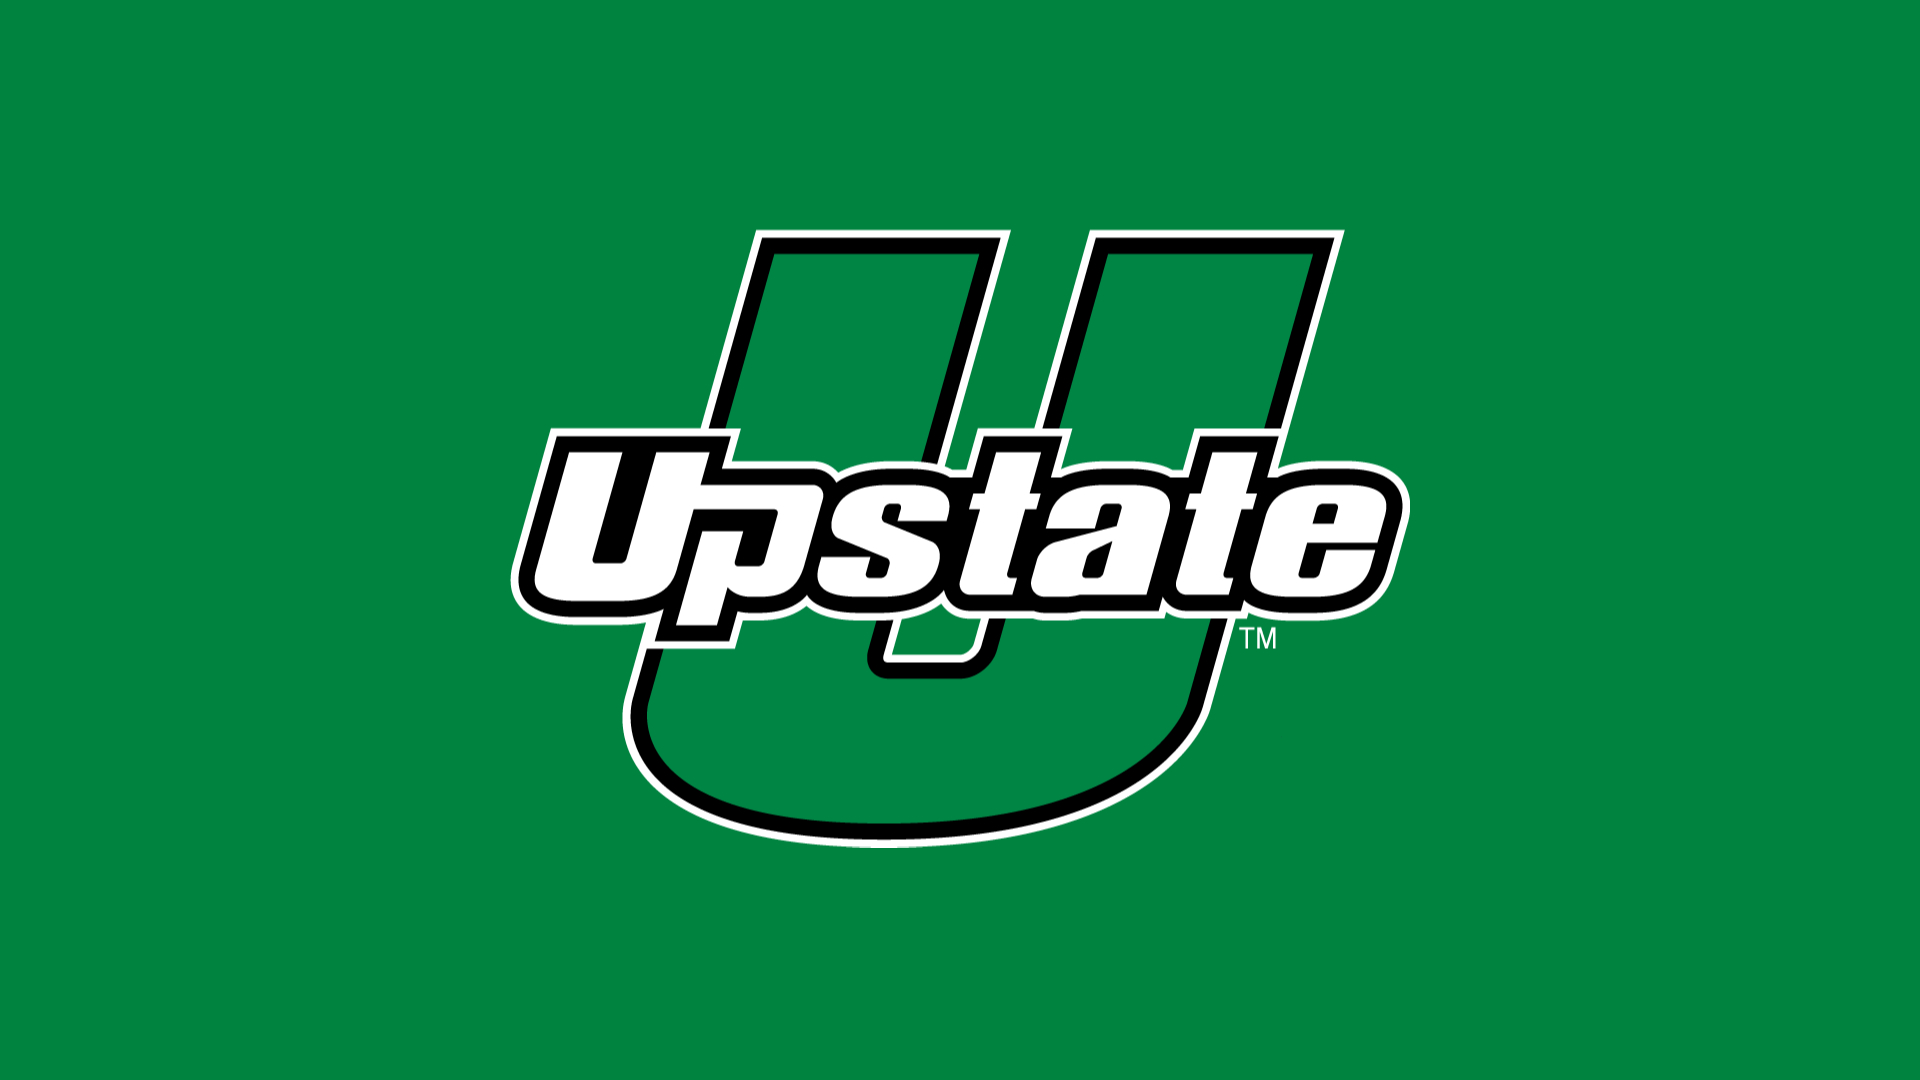 Marty Richter – Experienced Basketball Coach Named Head Coach at USC Upstate